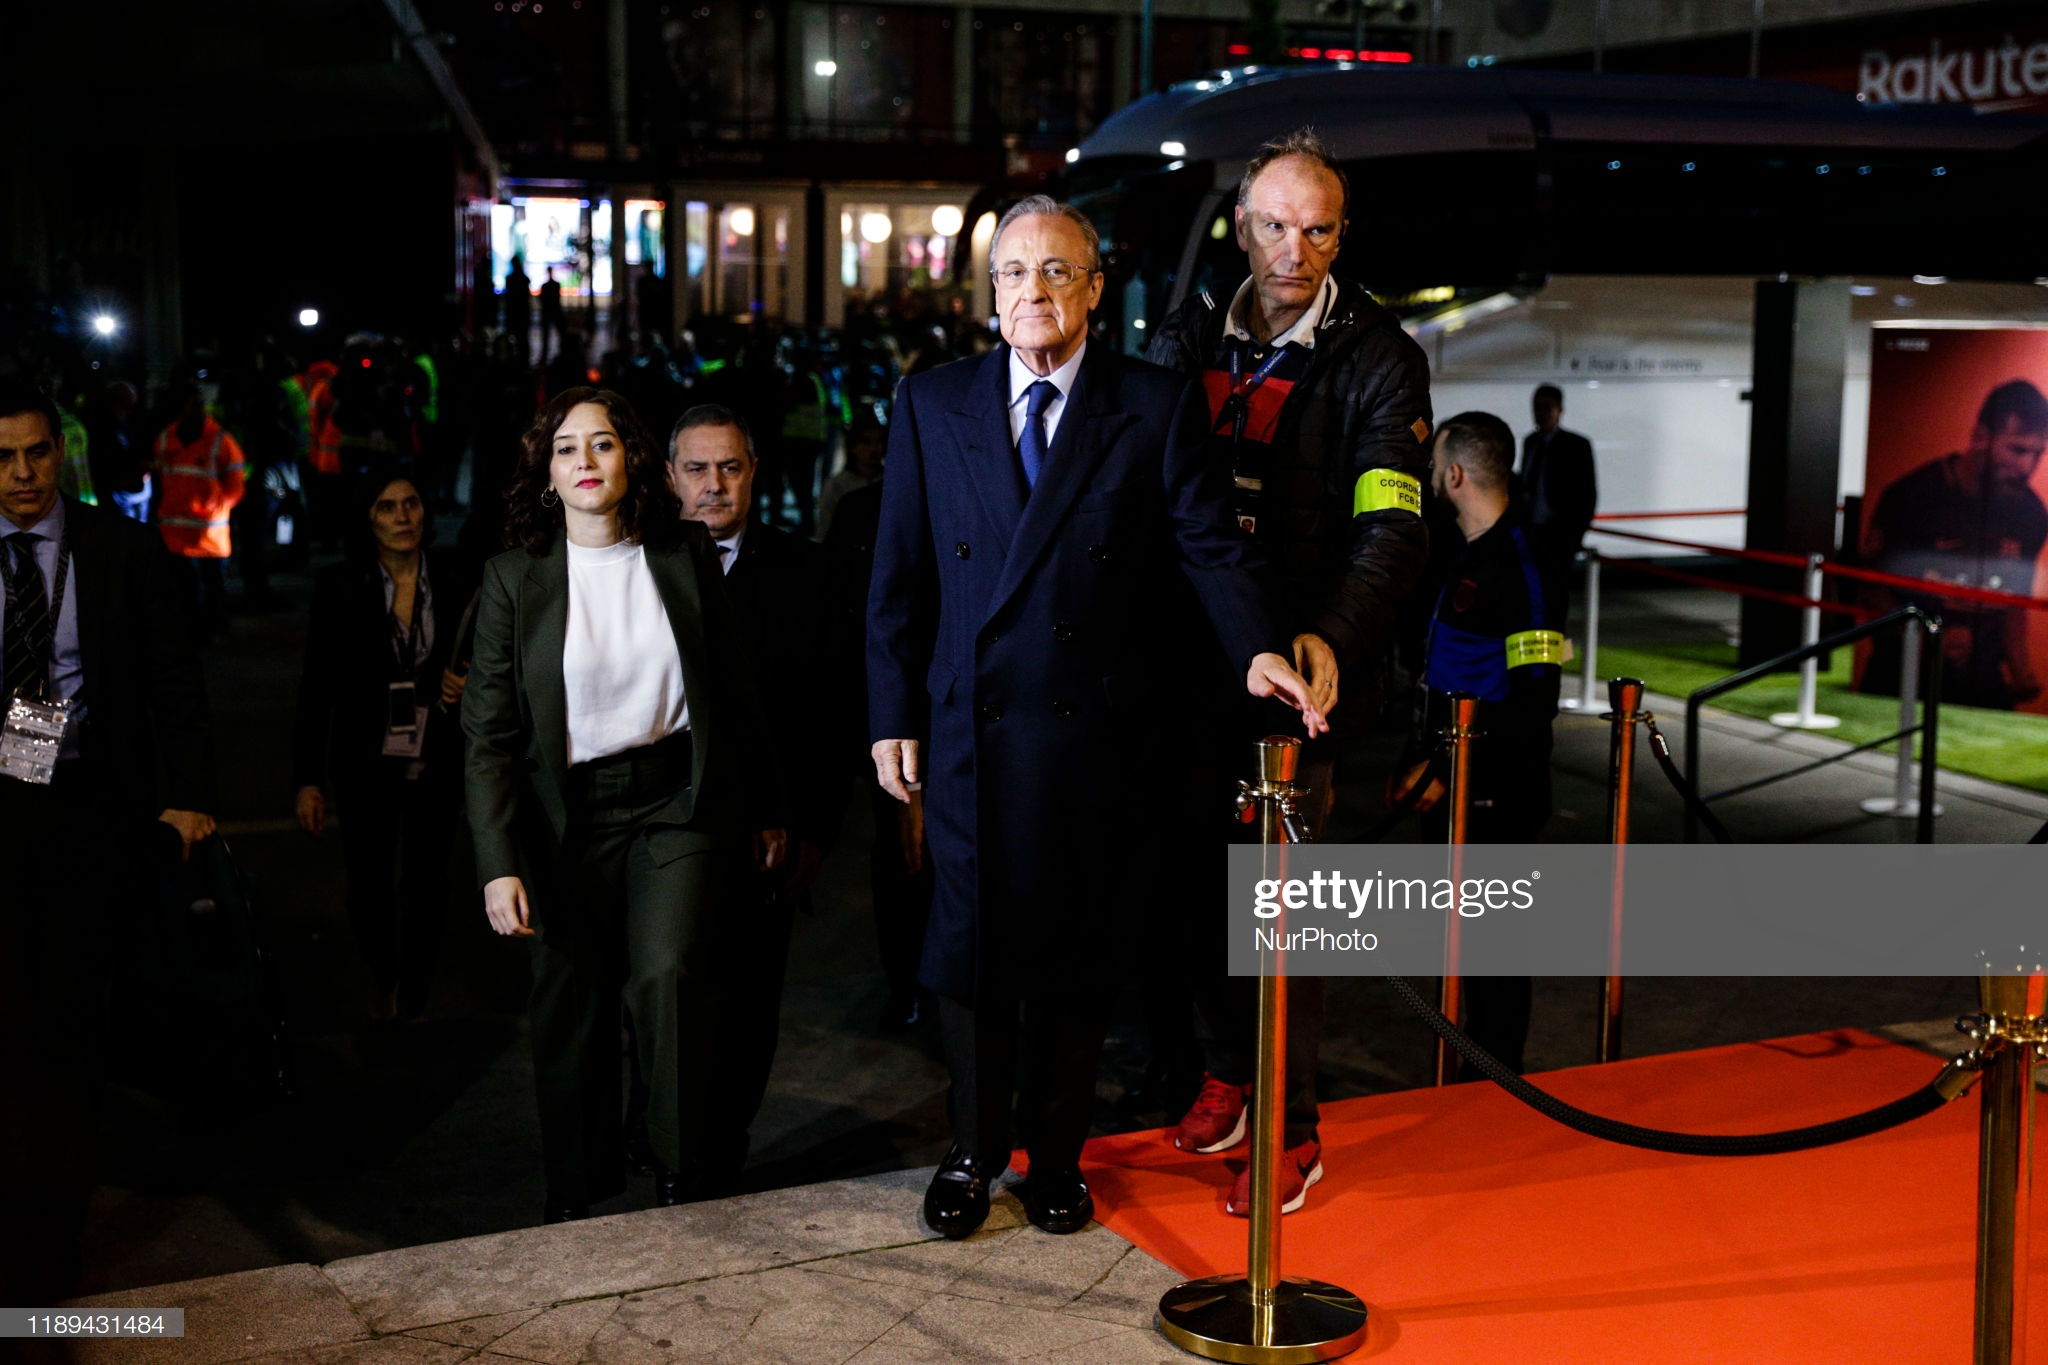 gettyimages-1189431484-2048x2048.jpg